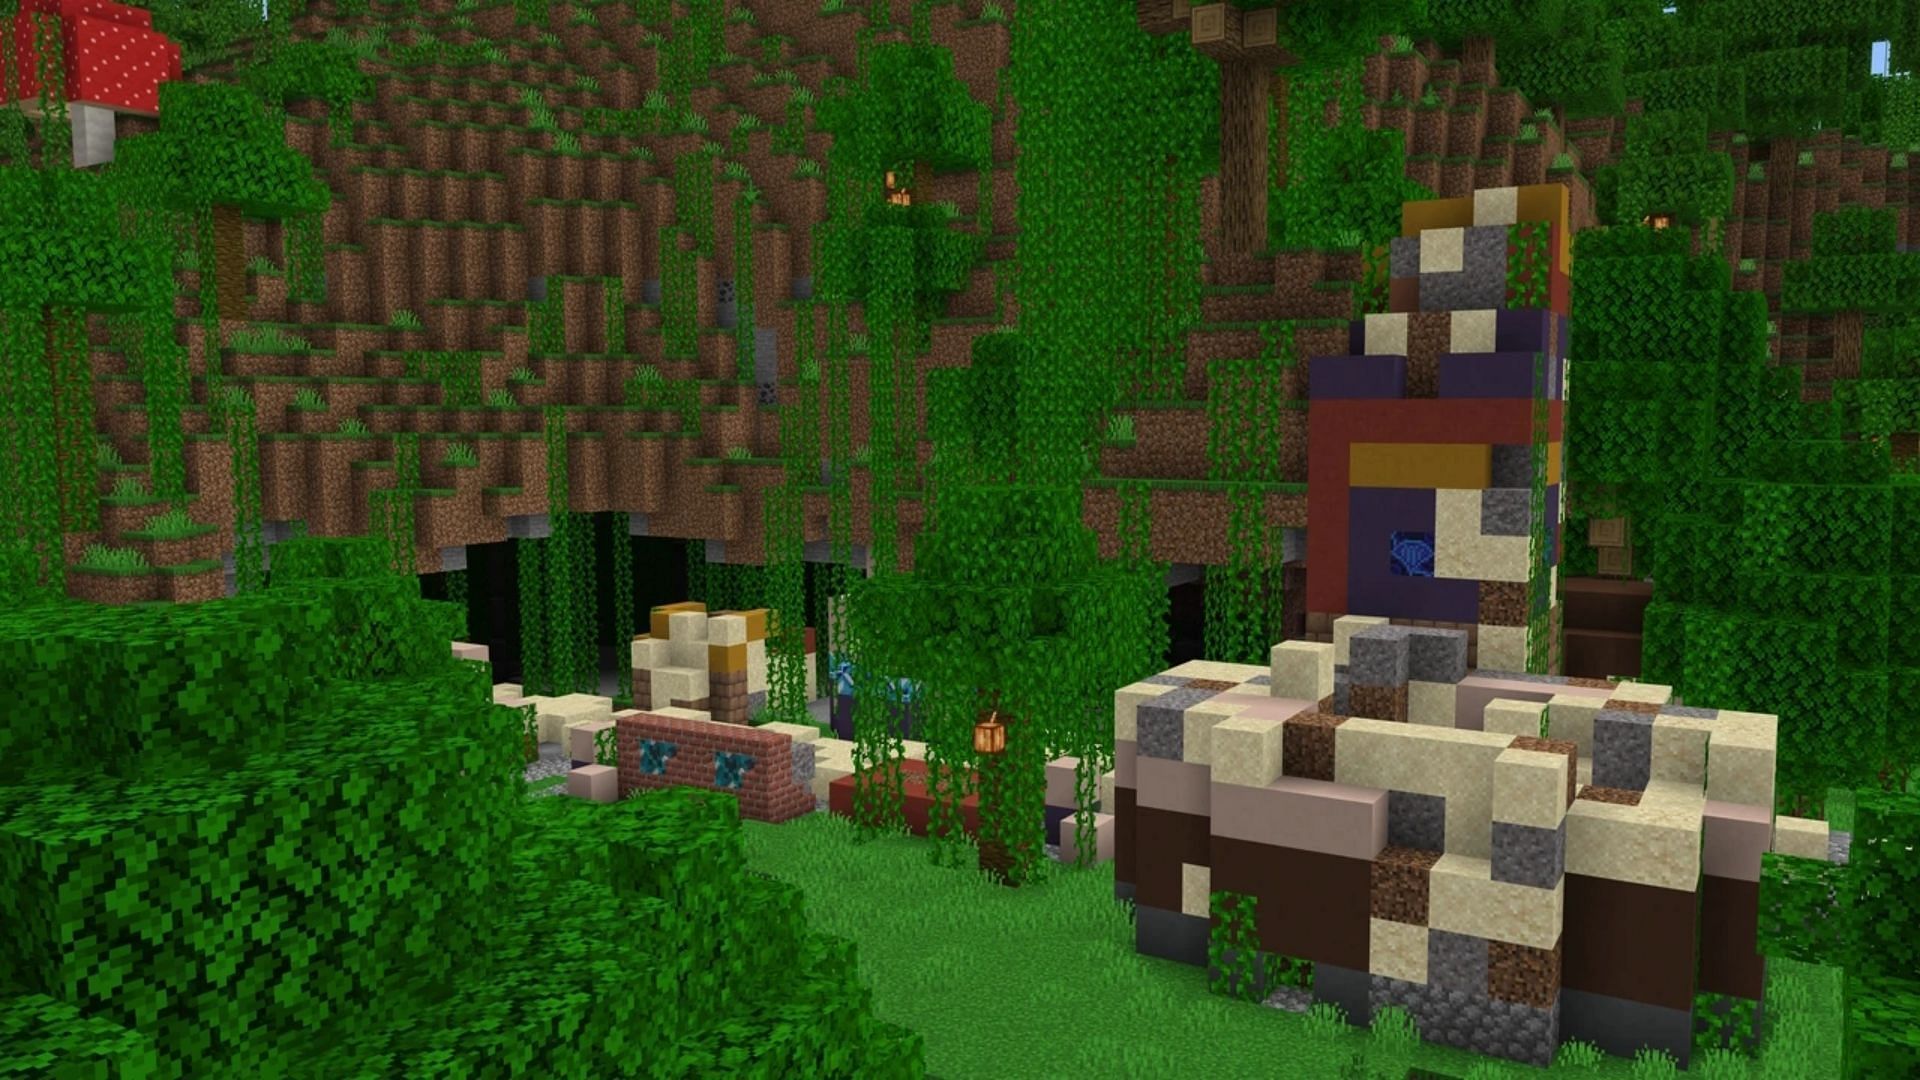 Trail Ruins are mostly hidden underground, with only a few blocks protruding out on the surface in Minecraft (Image via Mojang)